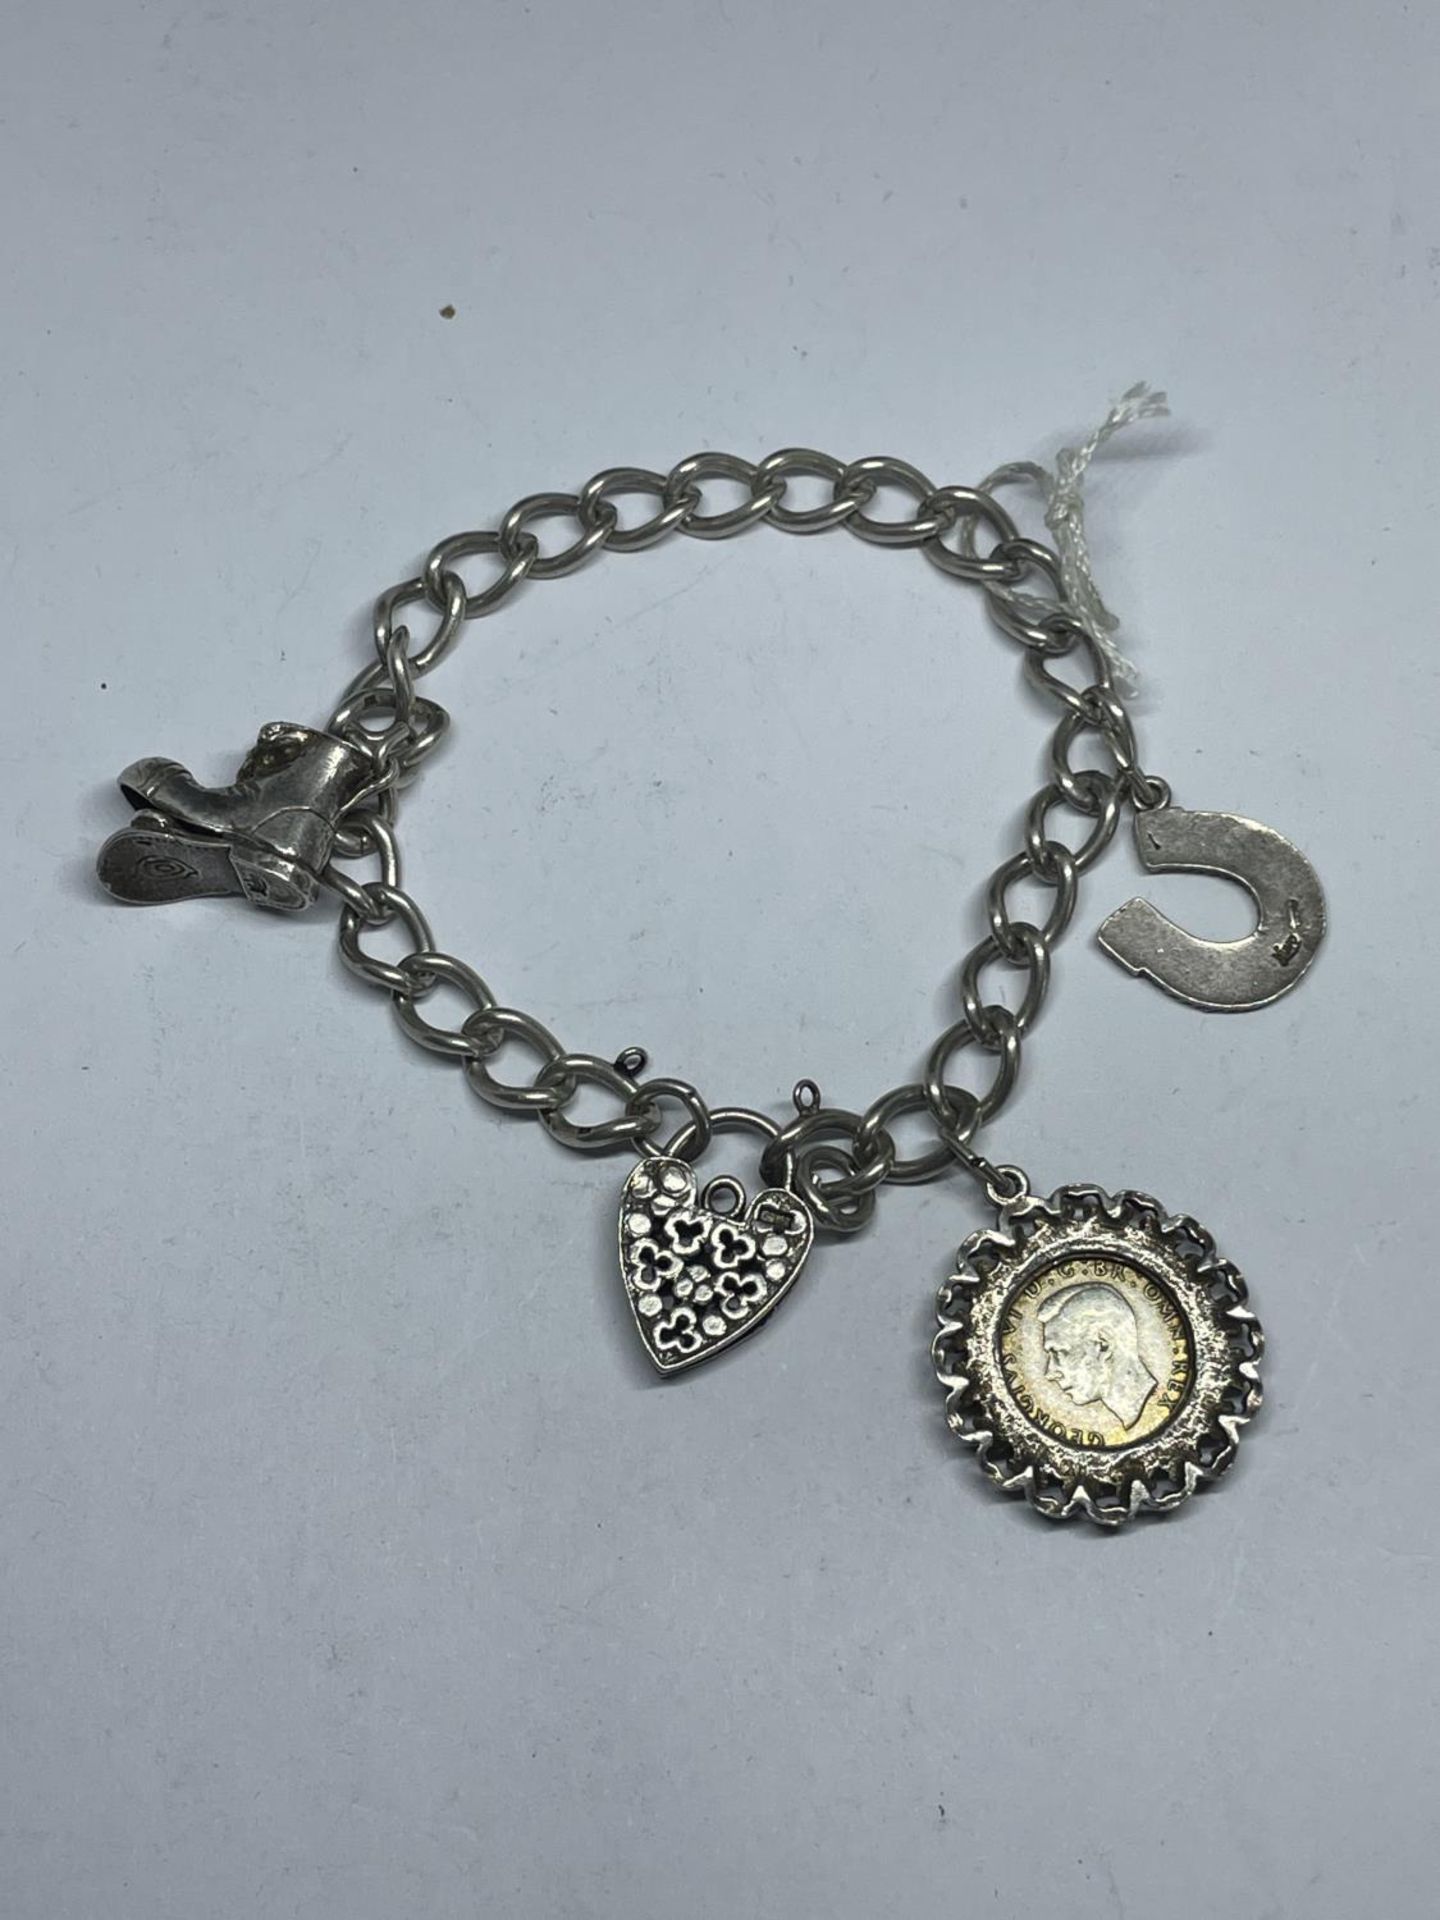 A SILVER CHARM BRACELET WITH THREE CHARMS AND A DECORATIVE HEART PADLOCK WEIGHT 25.5 GRAMS